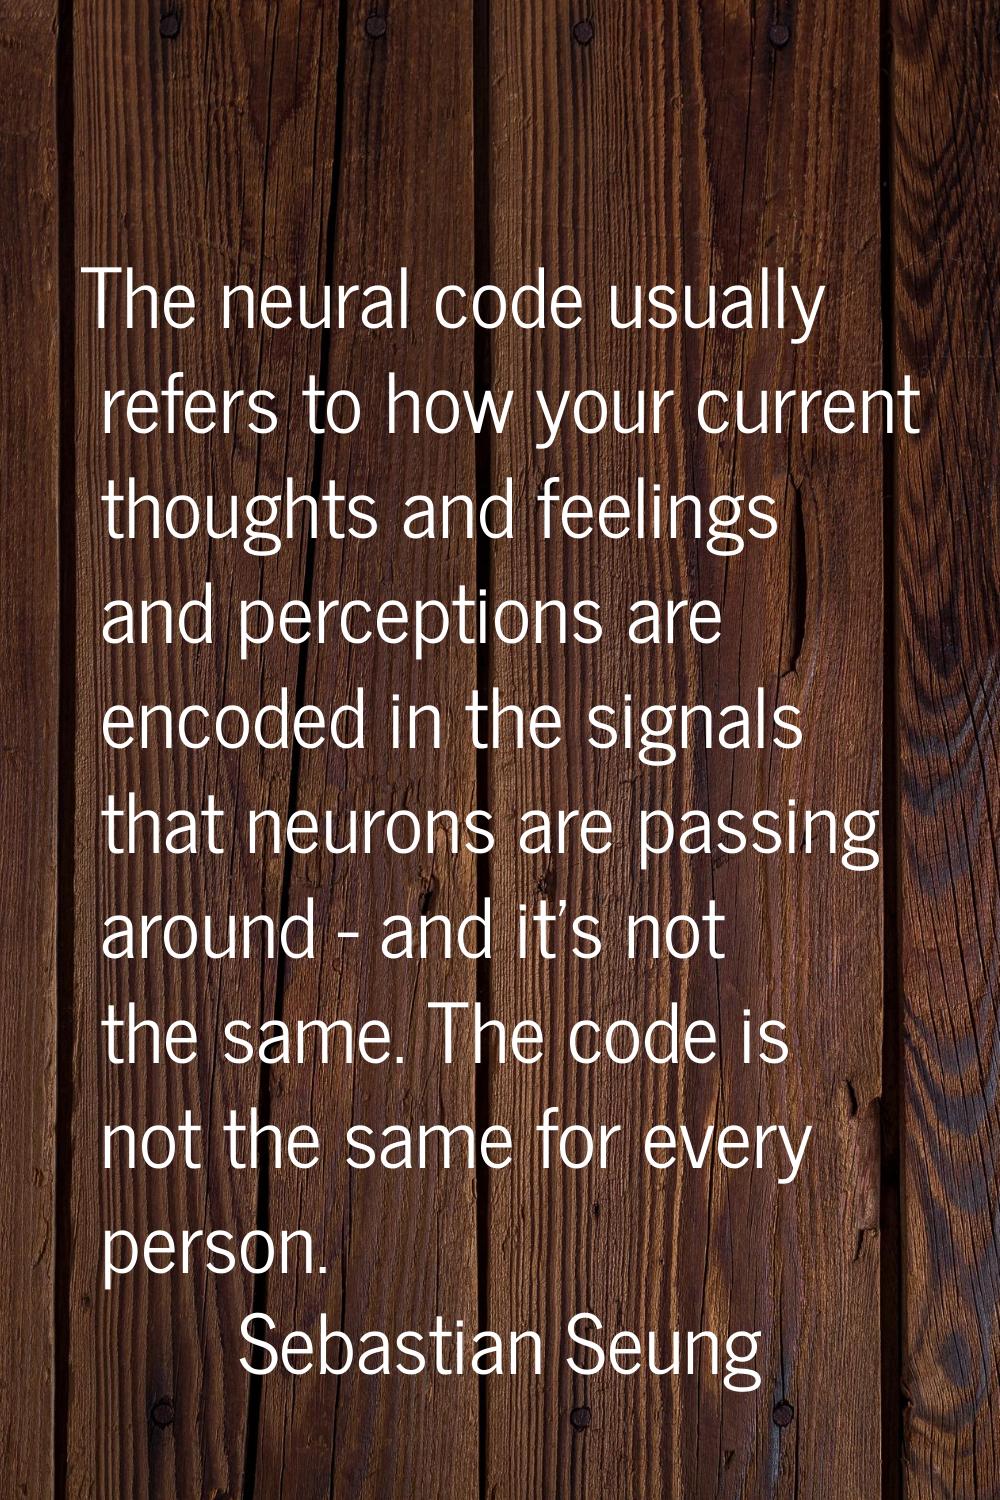 The neural code usually refers to how your current thoughts and feelings and perceptions are encode